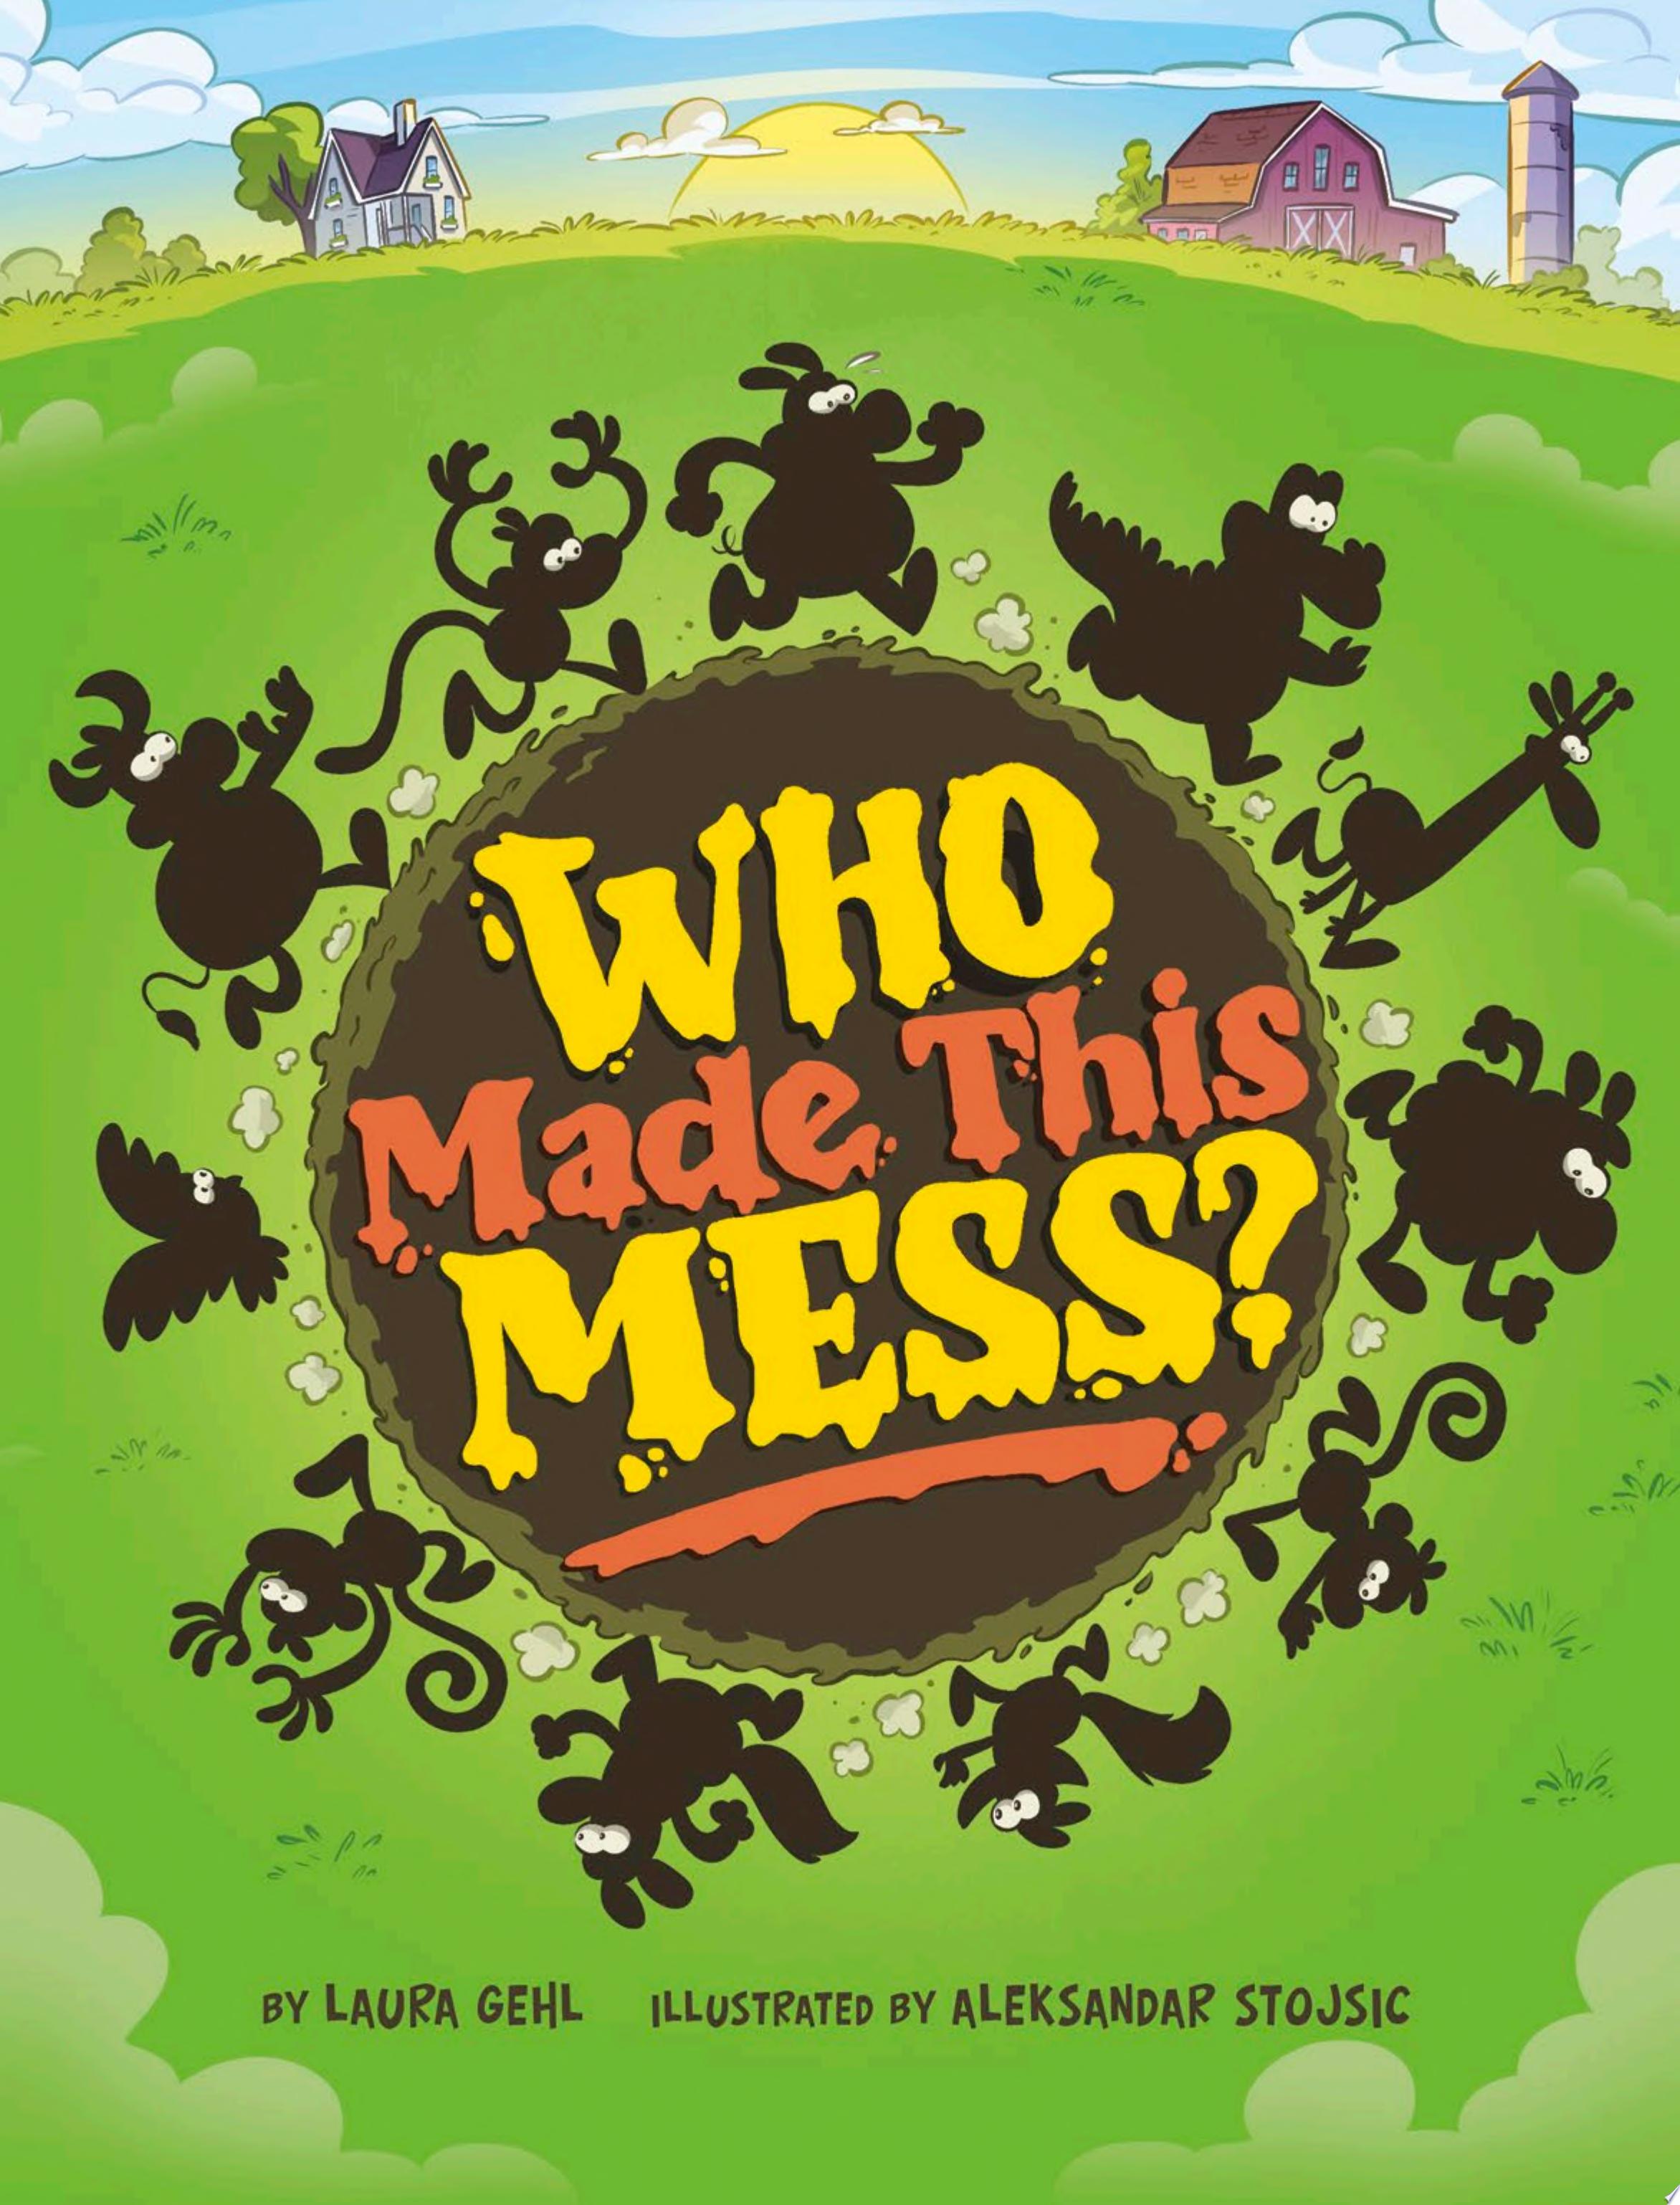 Image for "Who Made This Mess?"